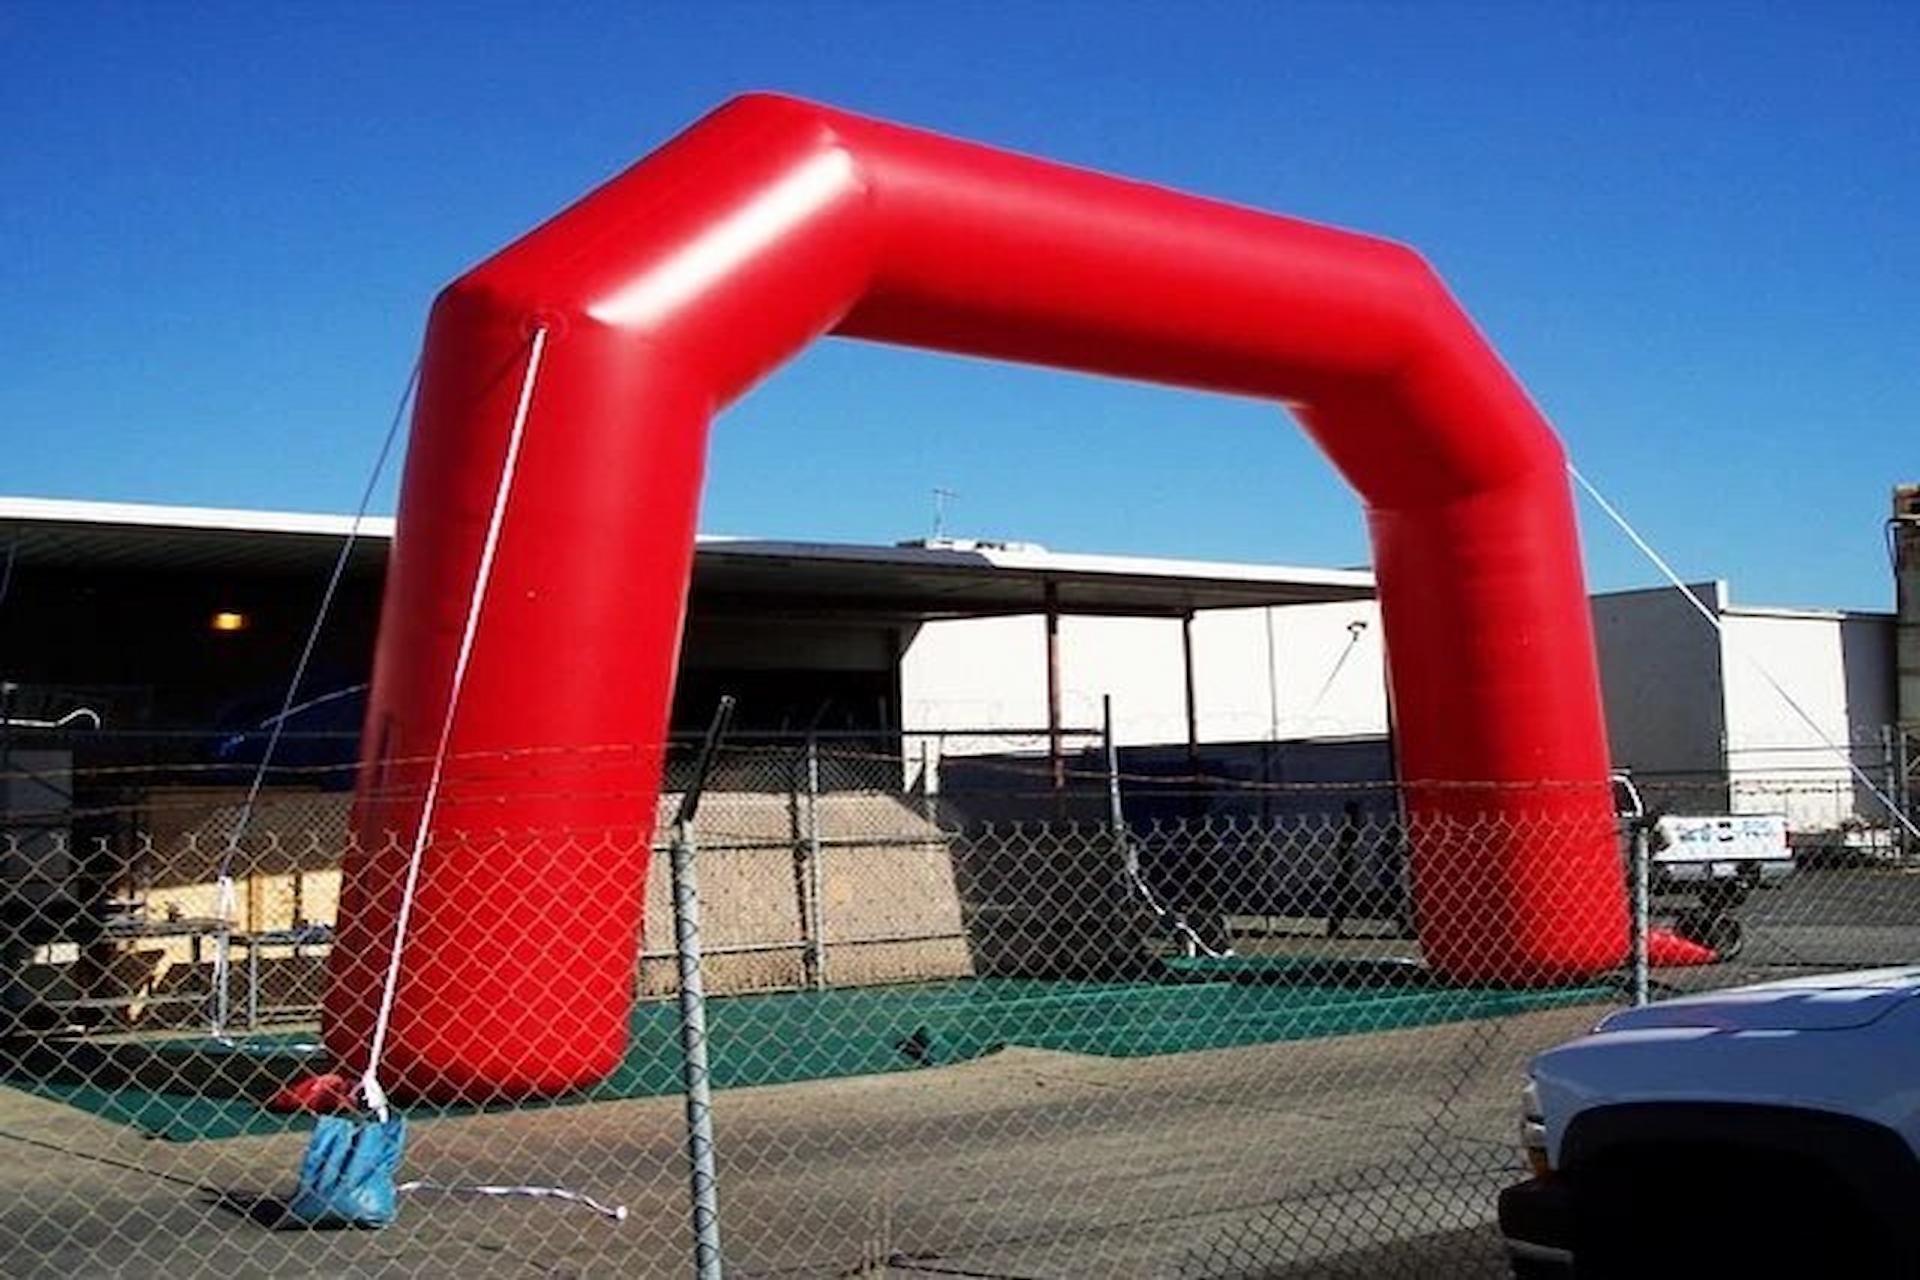 Inflatable arches